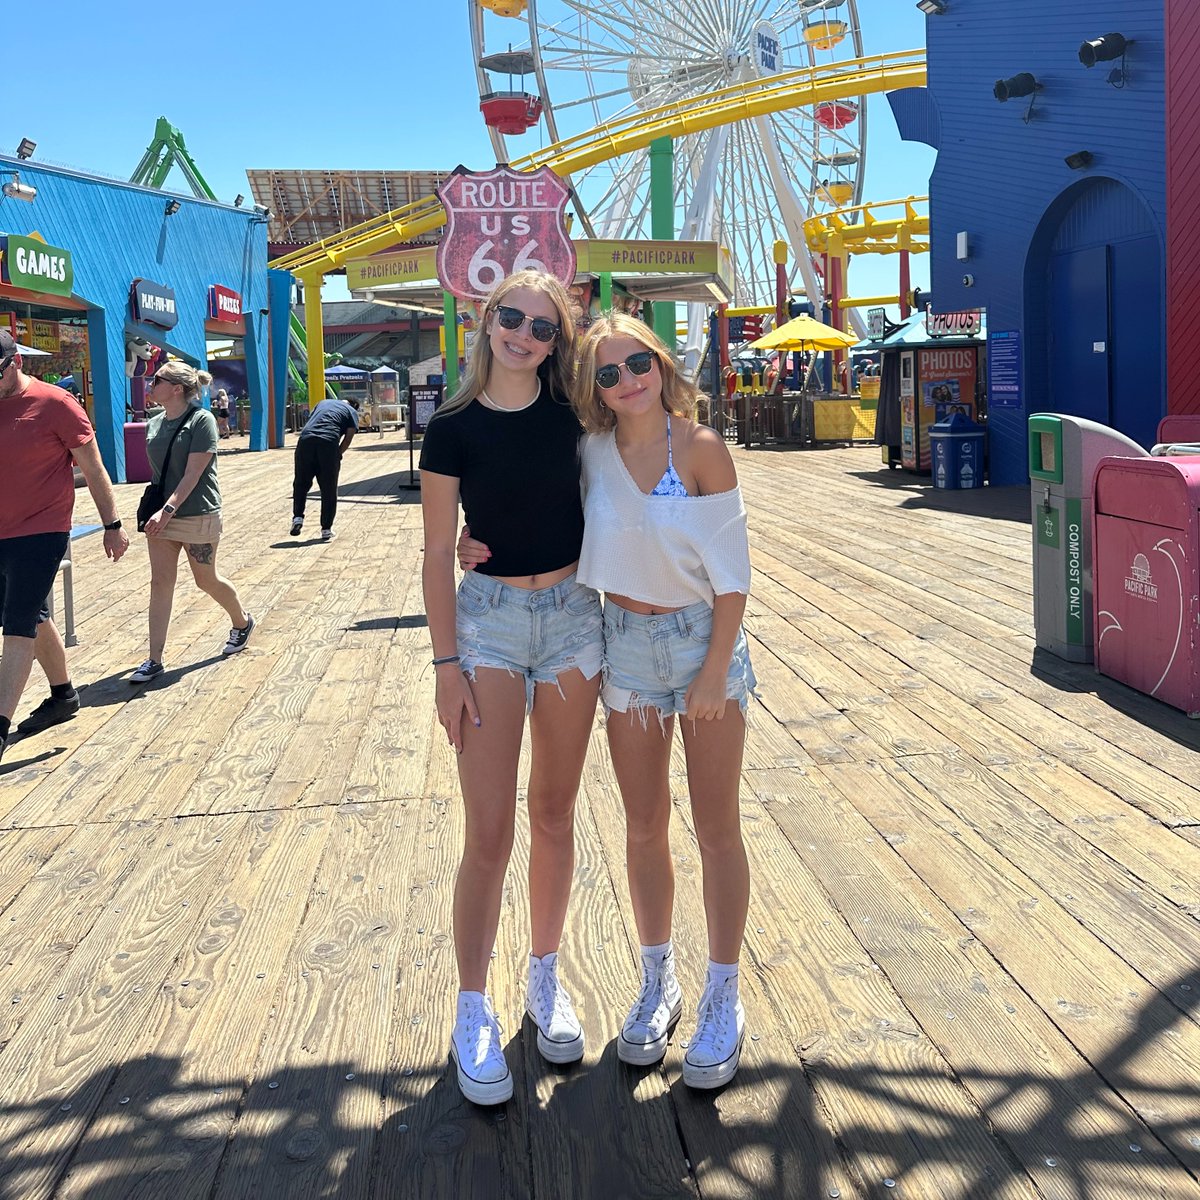 For 13-year-old Kilyn, her Wish to visit sunny California was the trip of a lifetime!🌟 'Words cannot express how grateful Kilyn and our family are for your gift to visit California. This trip gave her a chance to relax and enjoy some time for her.' #WishGrantedWednesday